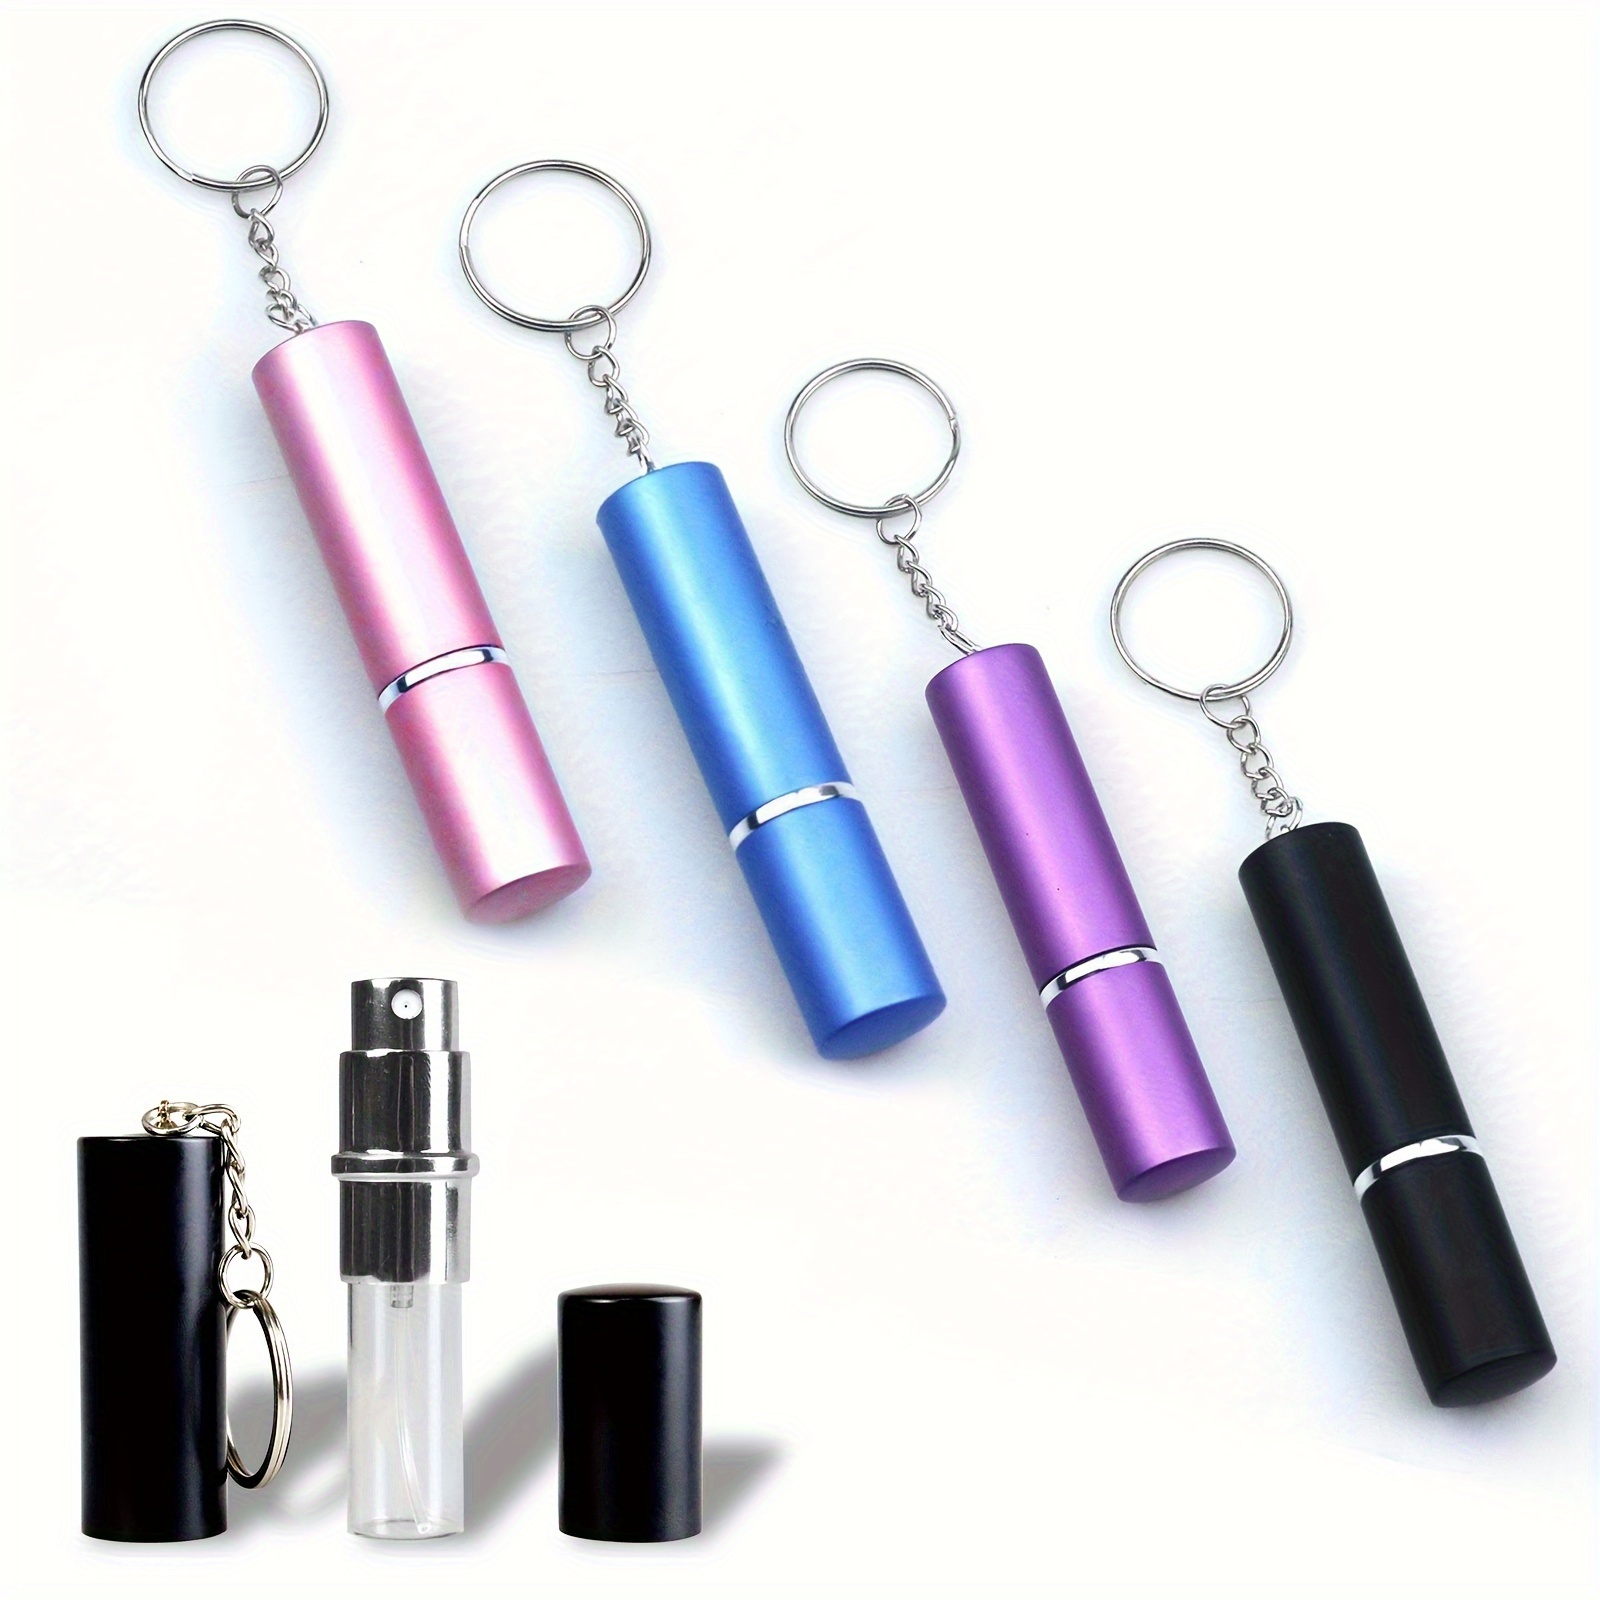 15pcs/set Daily Safety keychain kit with self-defense alarm,fur ball  pendant and stroage bags keychain for women - AliExpress